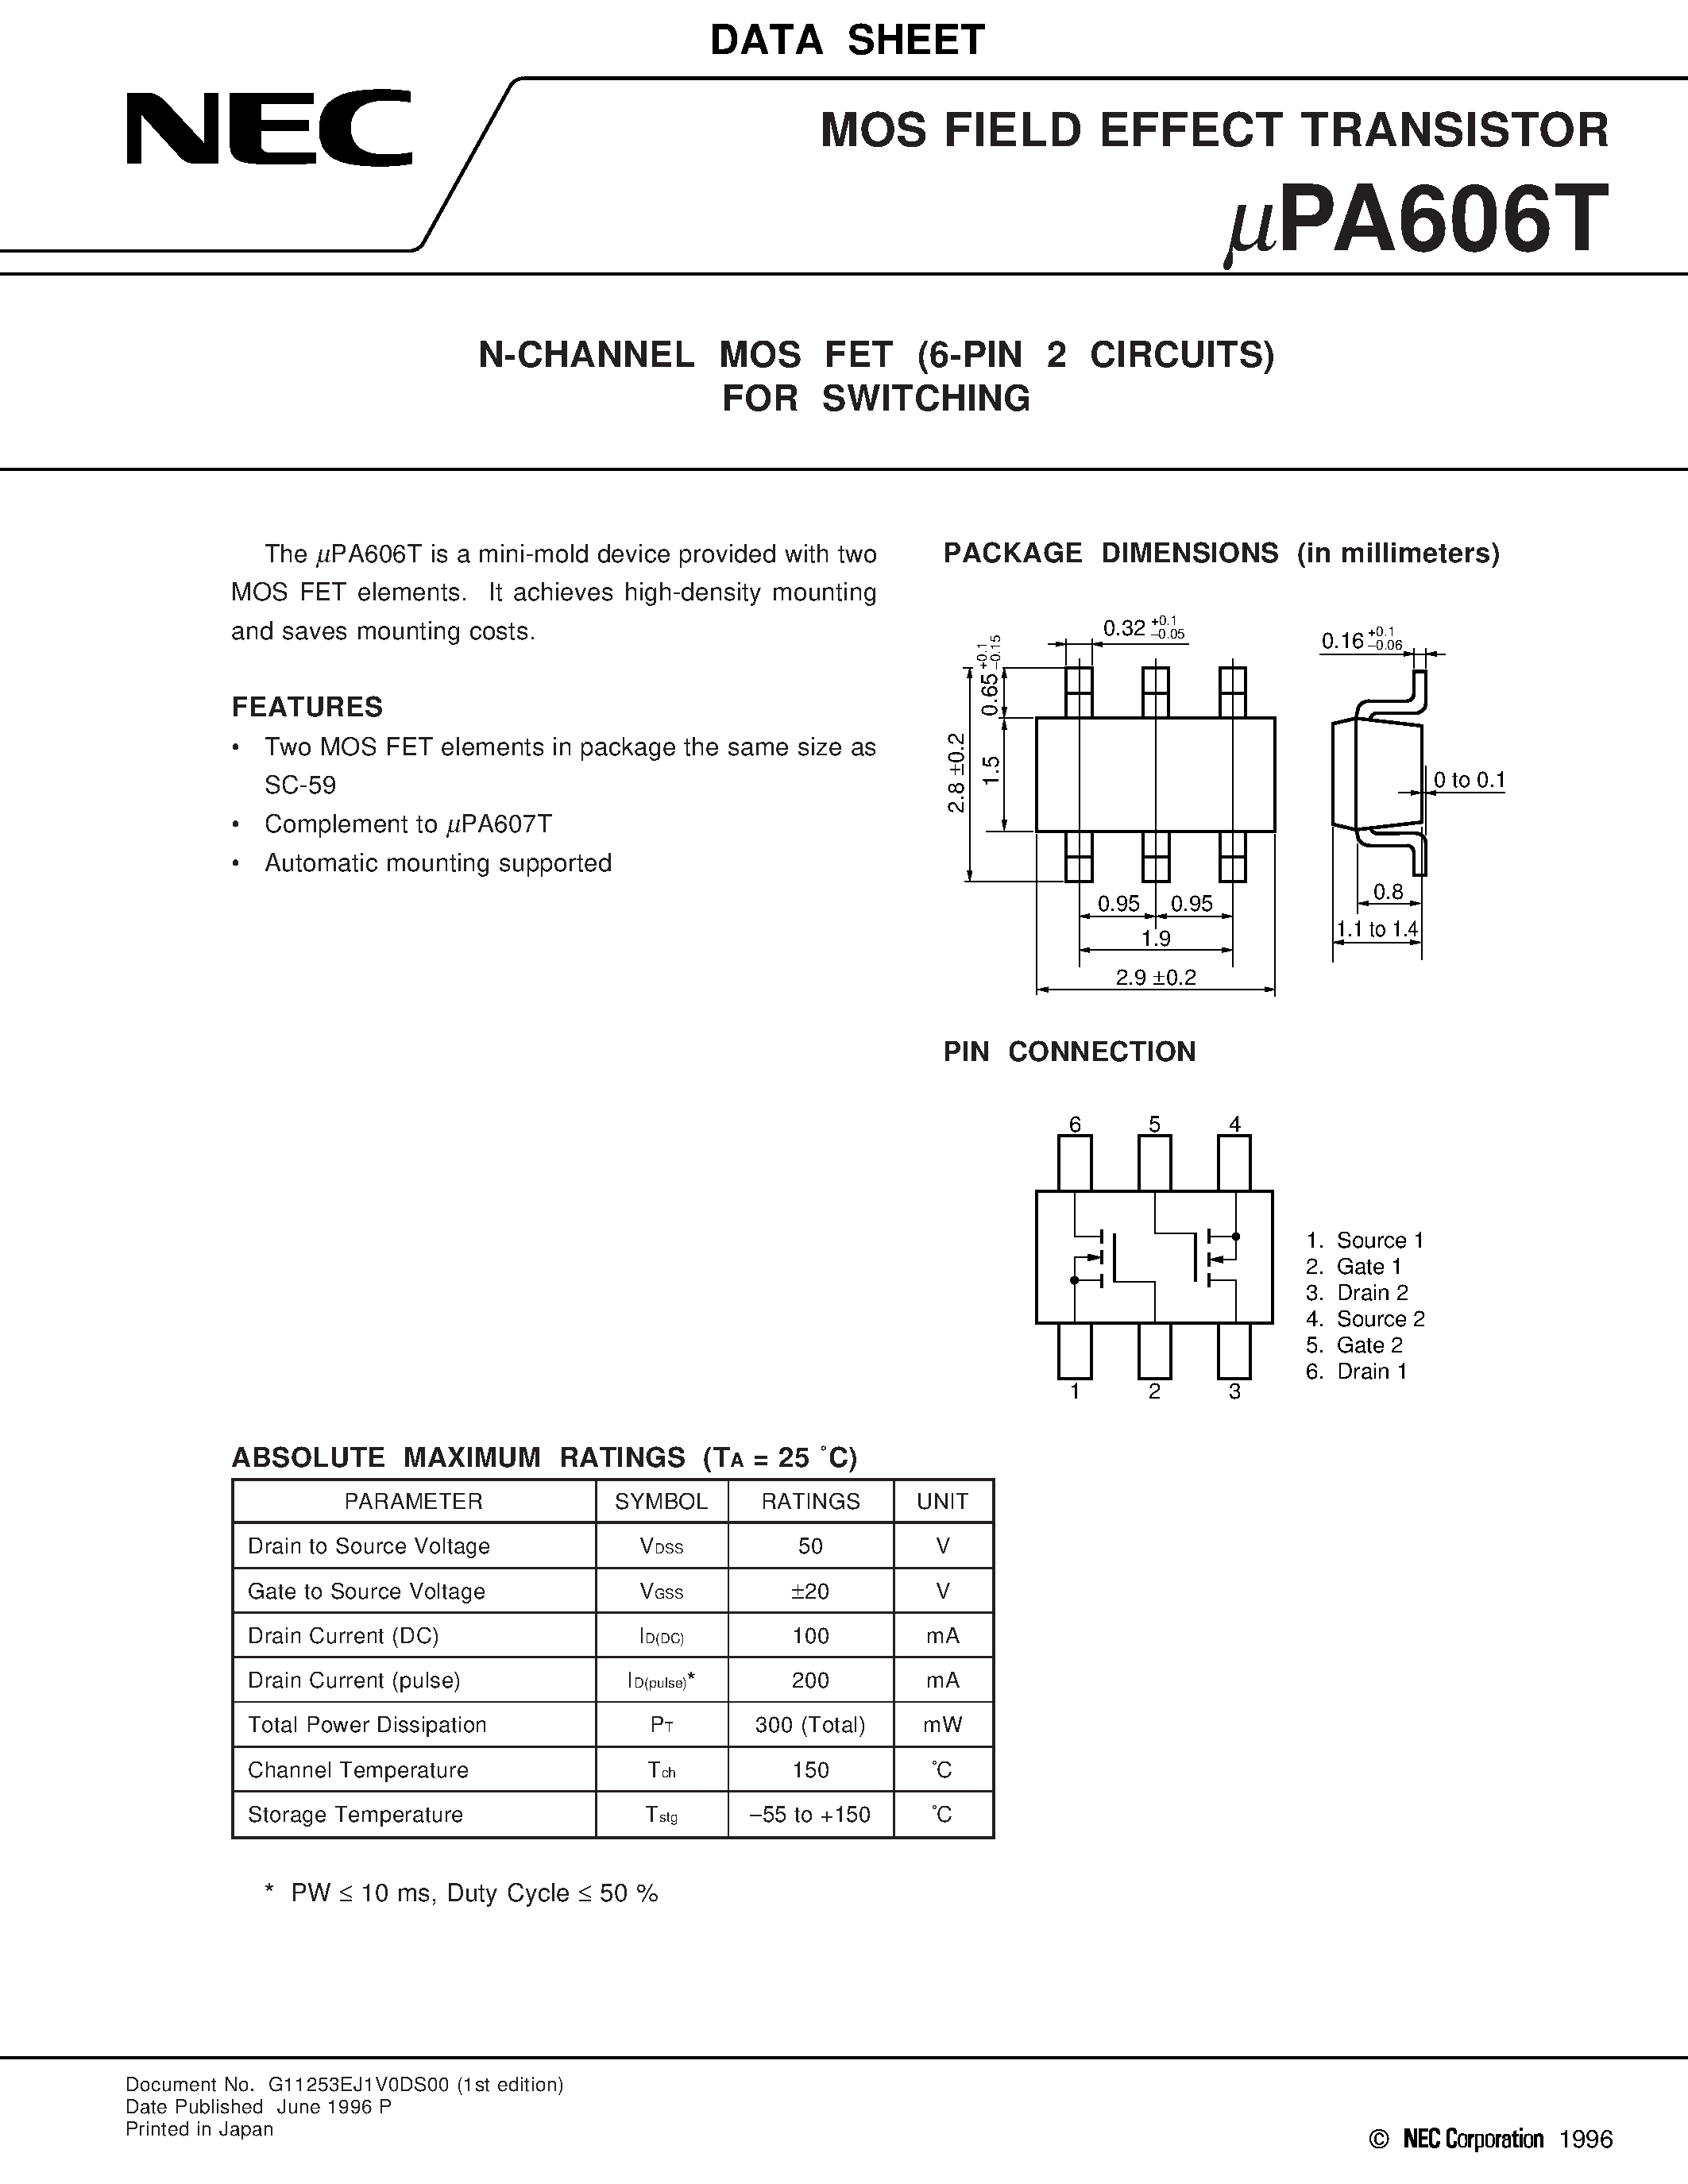 Datasheet UPA606T - N-CHANNEL MOS FET 6-PIN 2 CIRCUITS FOR SWITCHING page 1